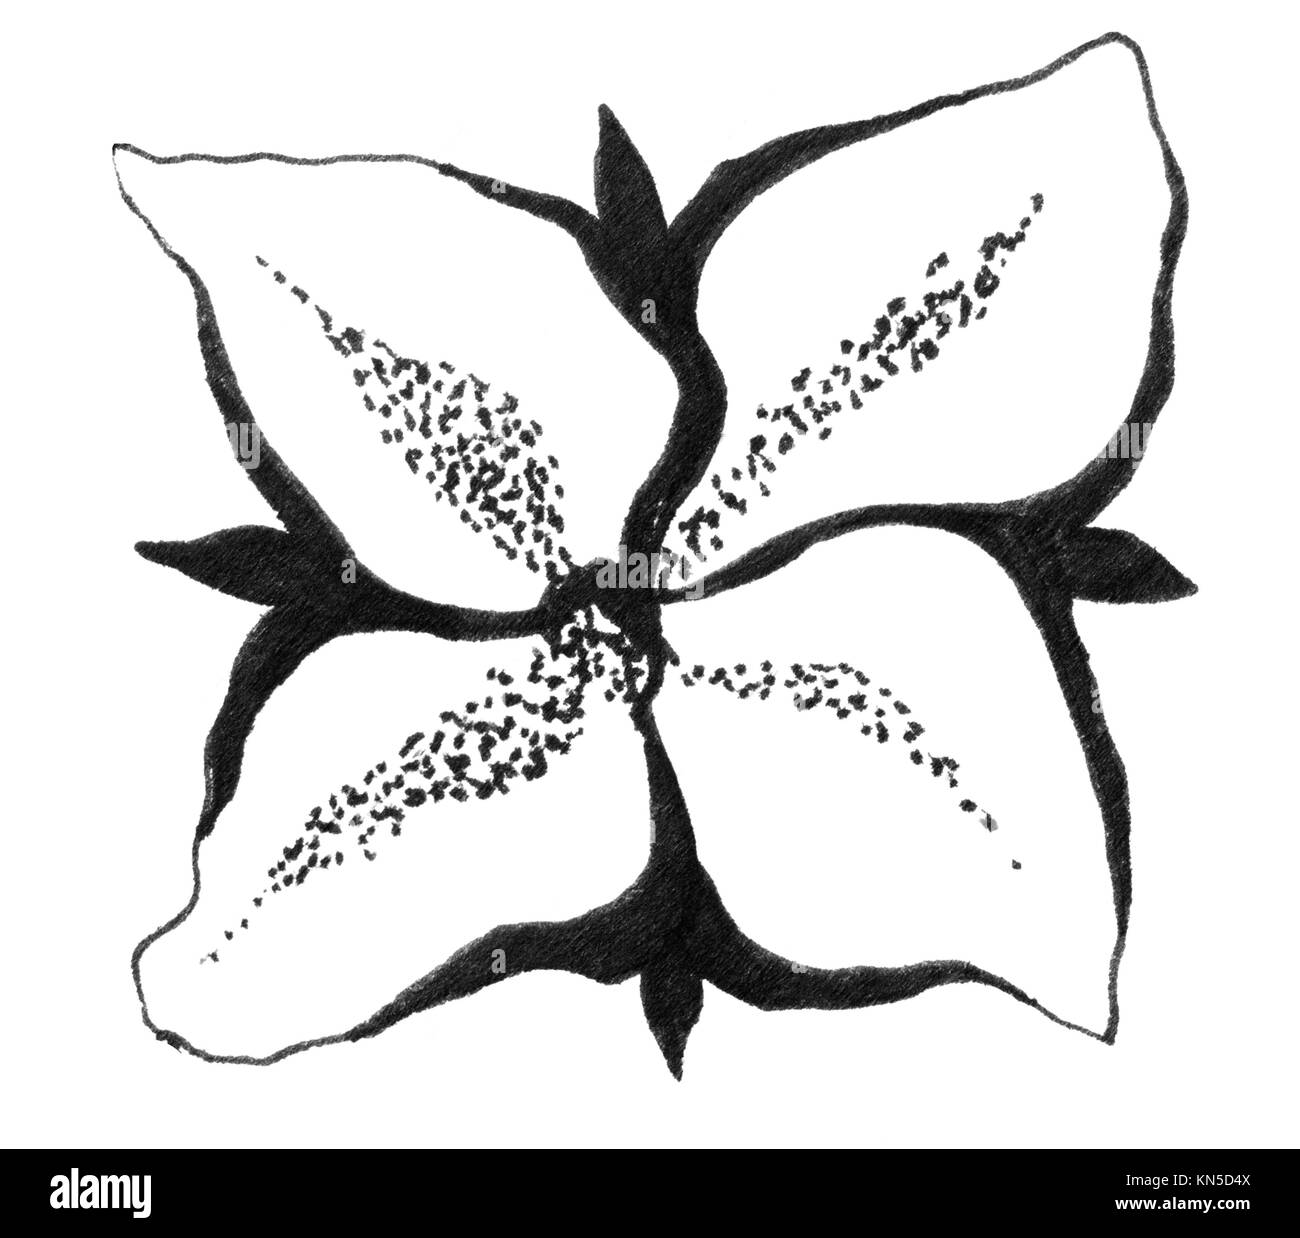 Four petal flower, original abstract ink sketch in black and white. Stock Photo